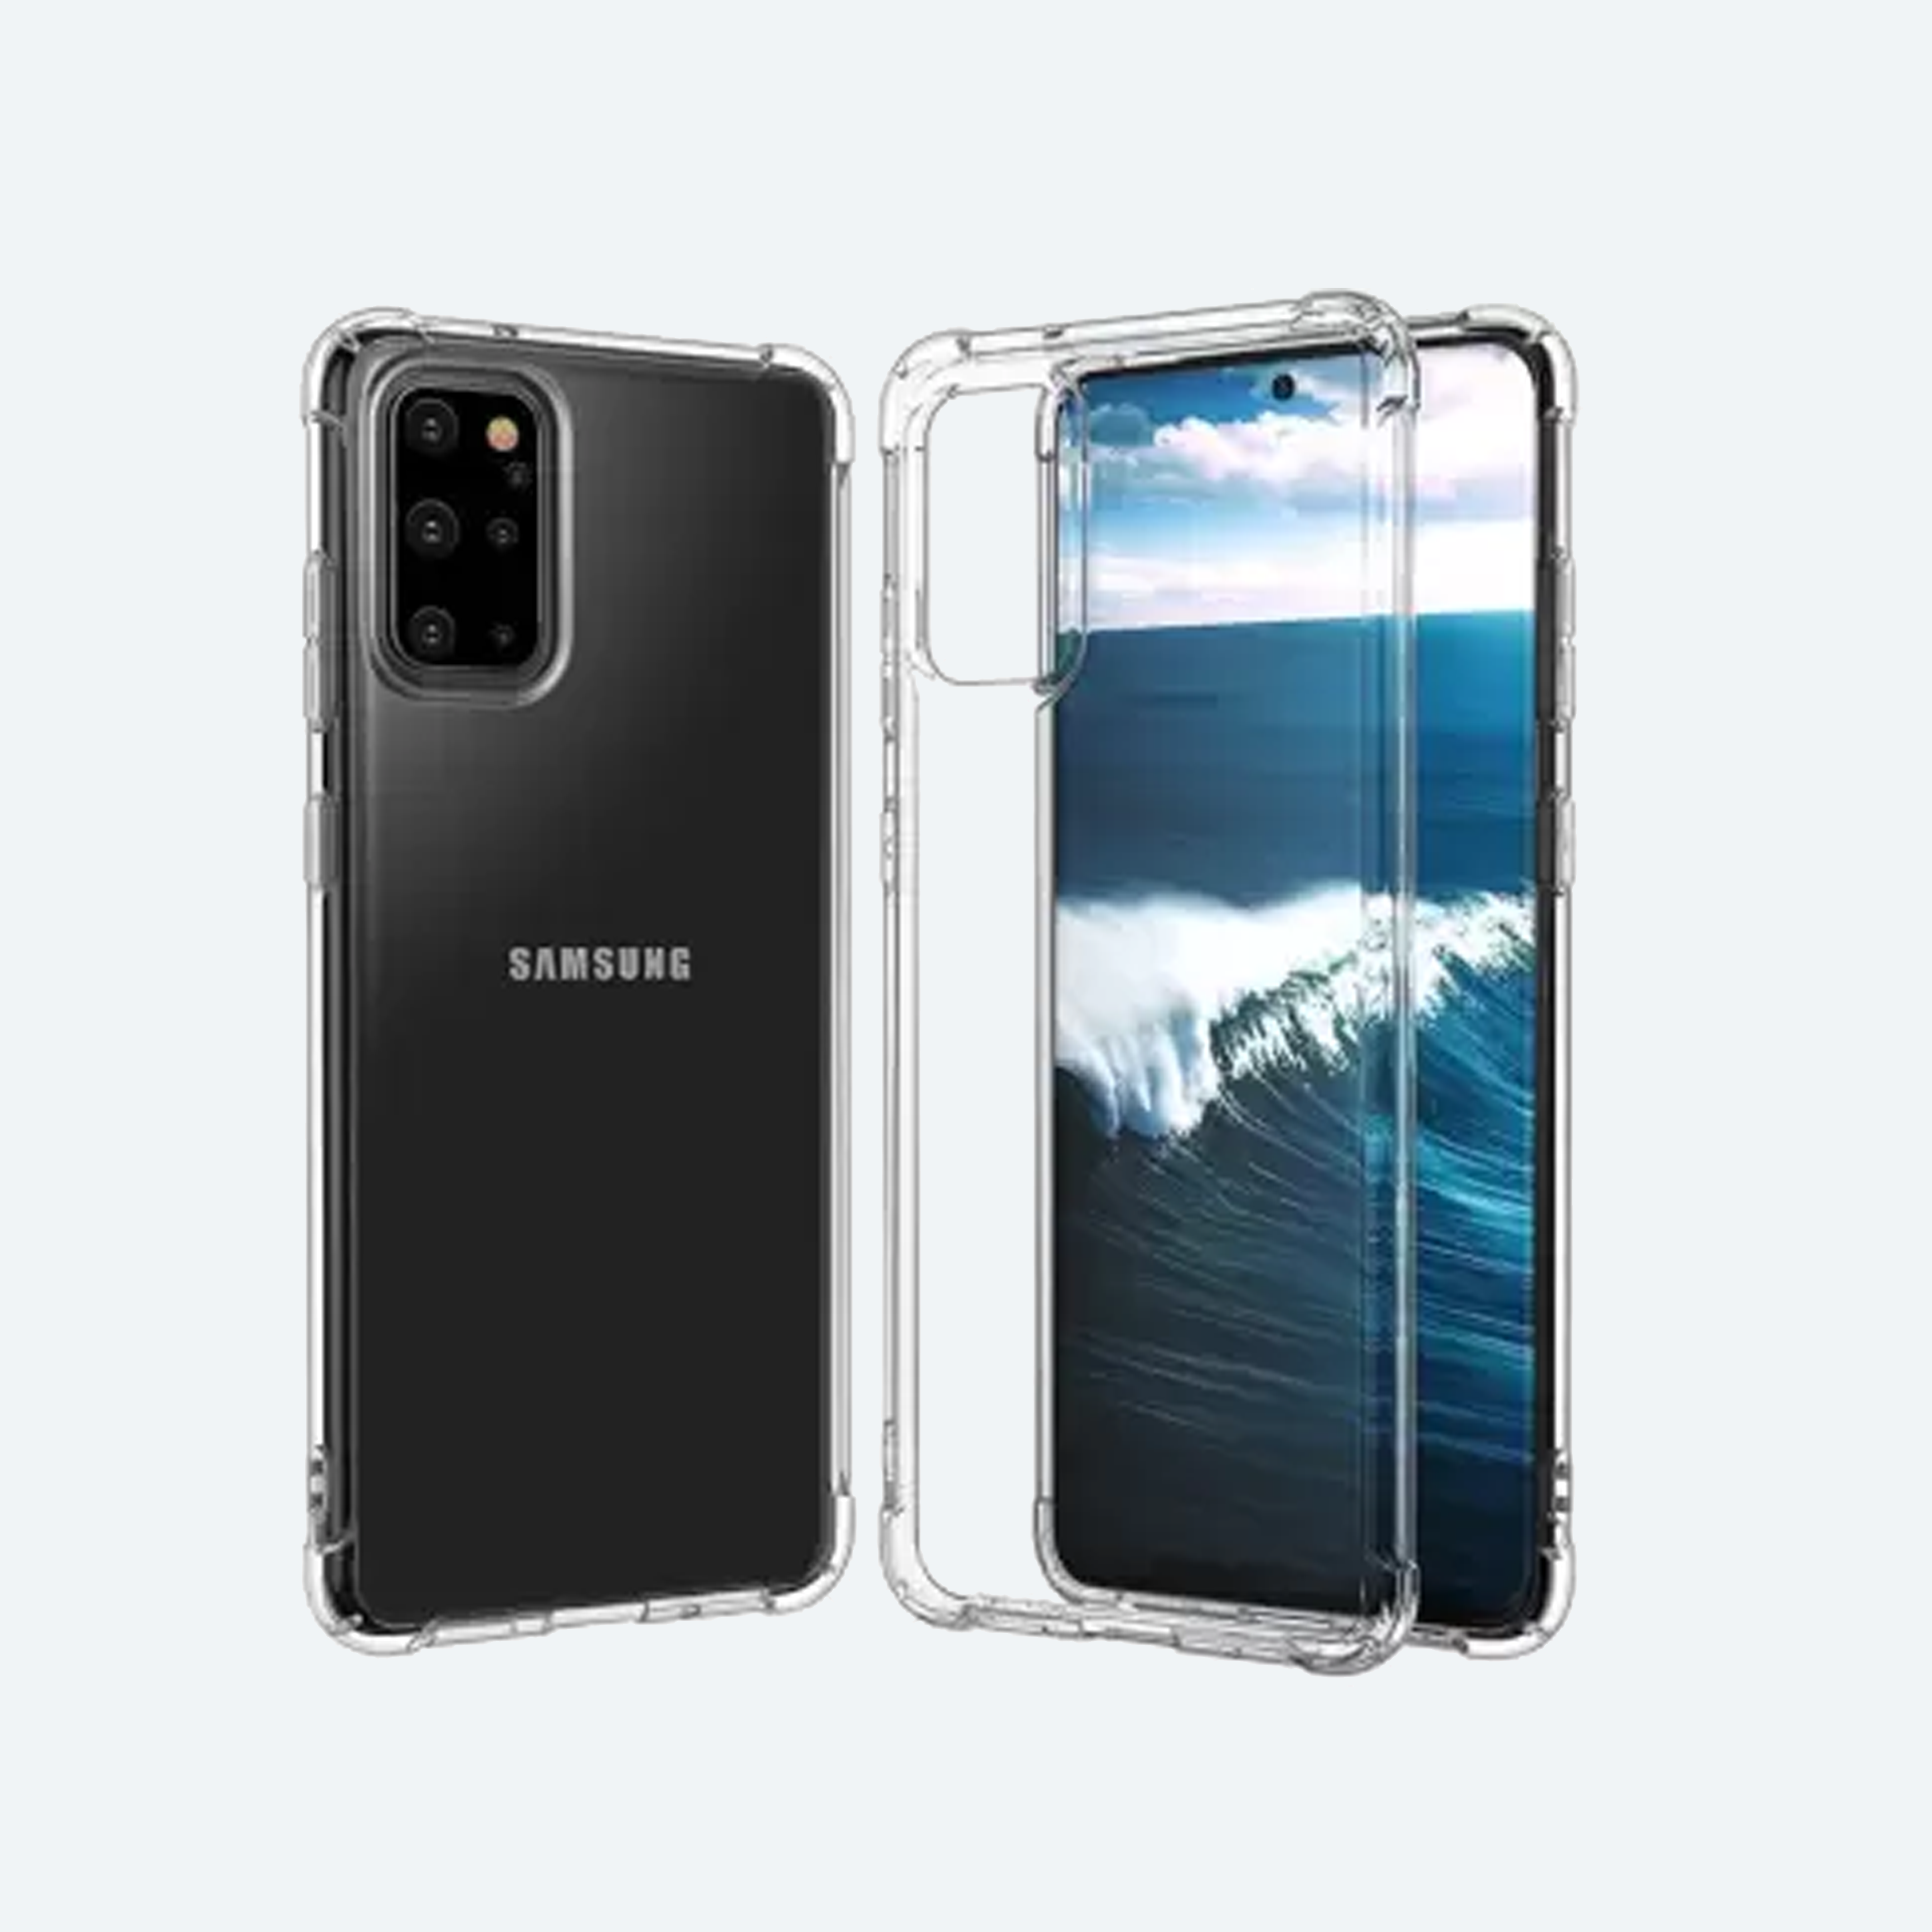 Samsung Galaxy S20 Ultra Transparent Back Cover